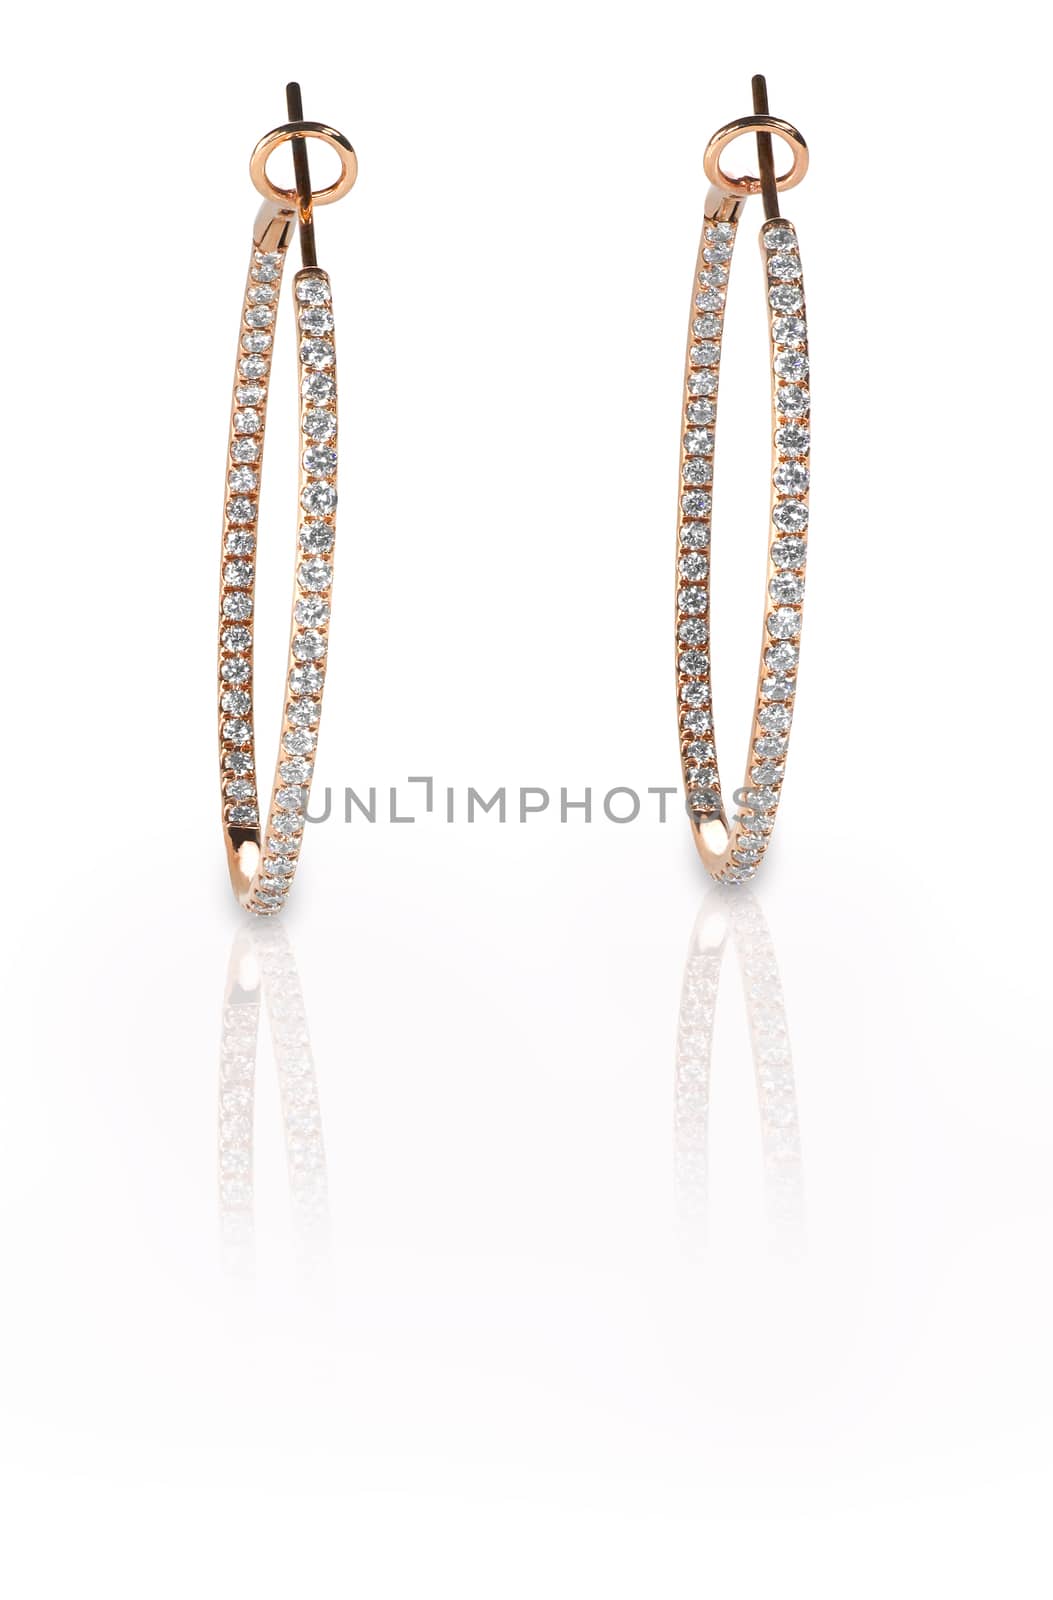 Pierced diamond hoop earrings in rose gold isolated on a white background with reflection